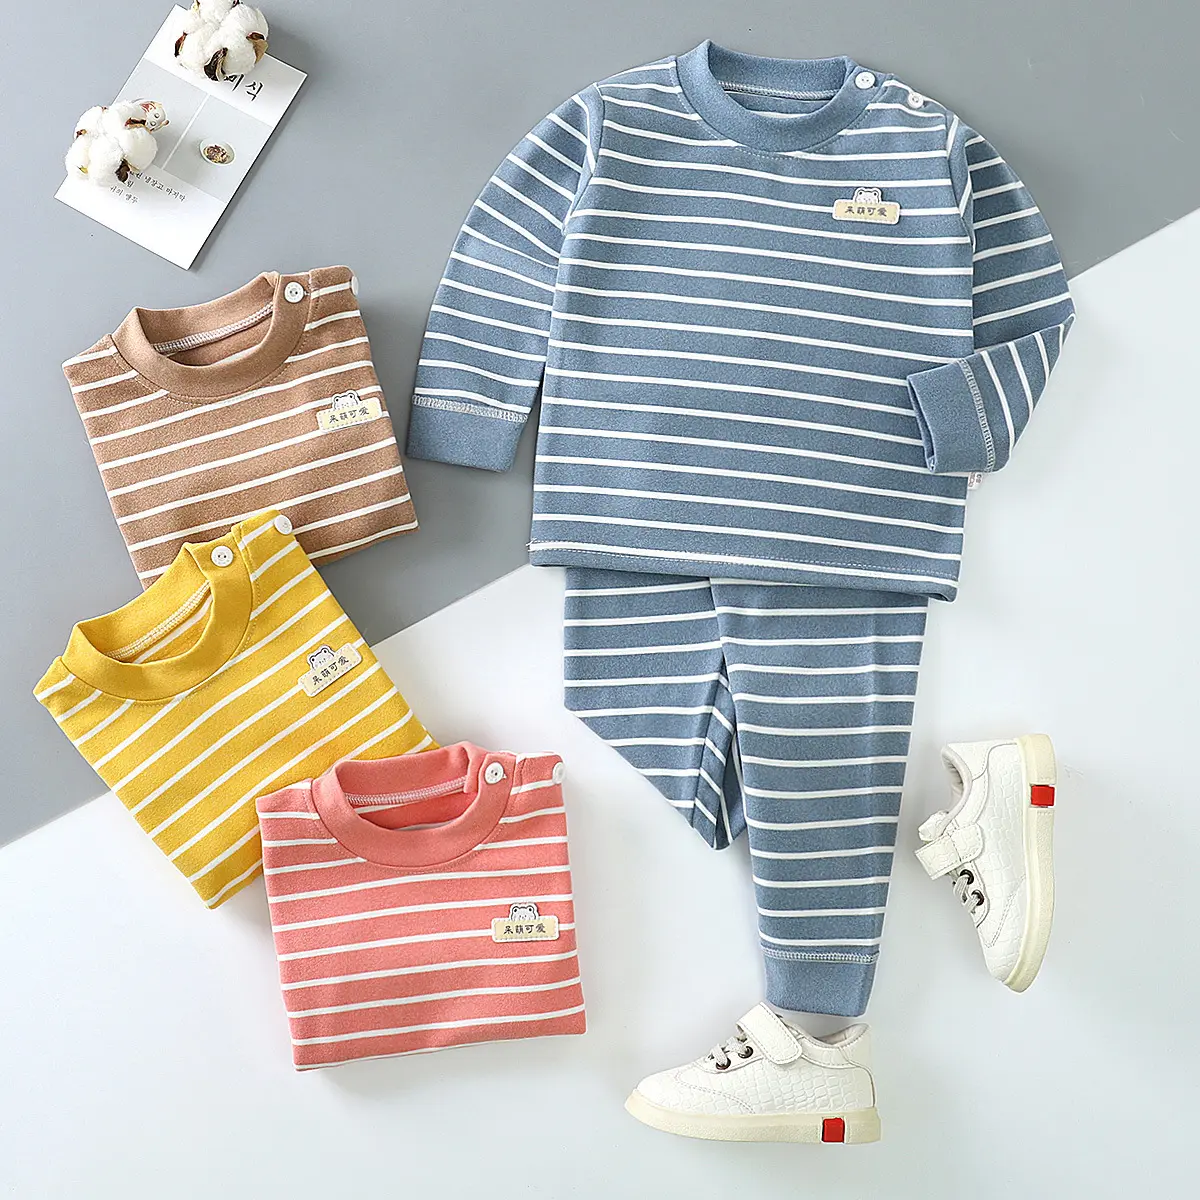 Hongwin Newborn Baby Clothing Sets Summer Long Sleeve Knitted Cotton Tops Boys Girls Outfits 2 Pieces Baby Clothing